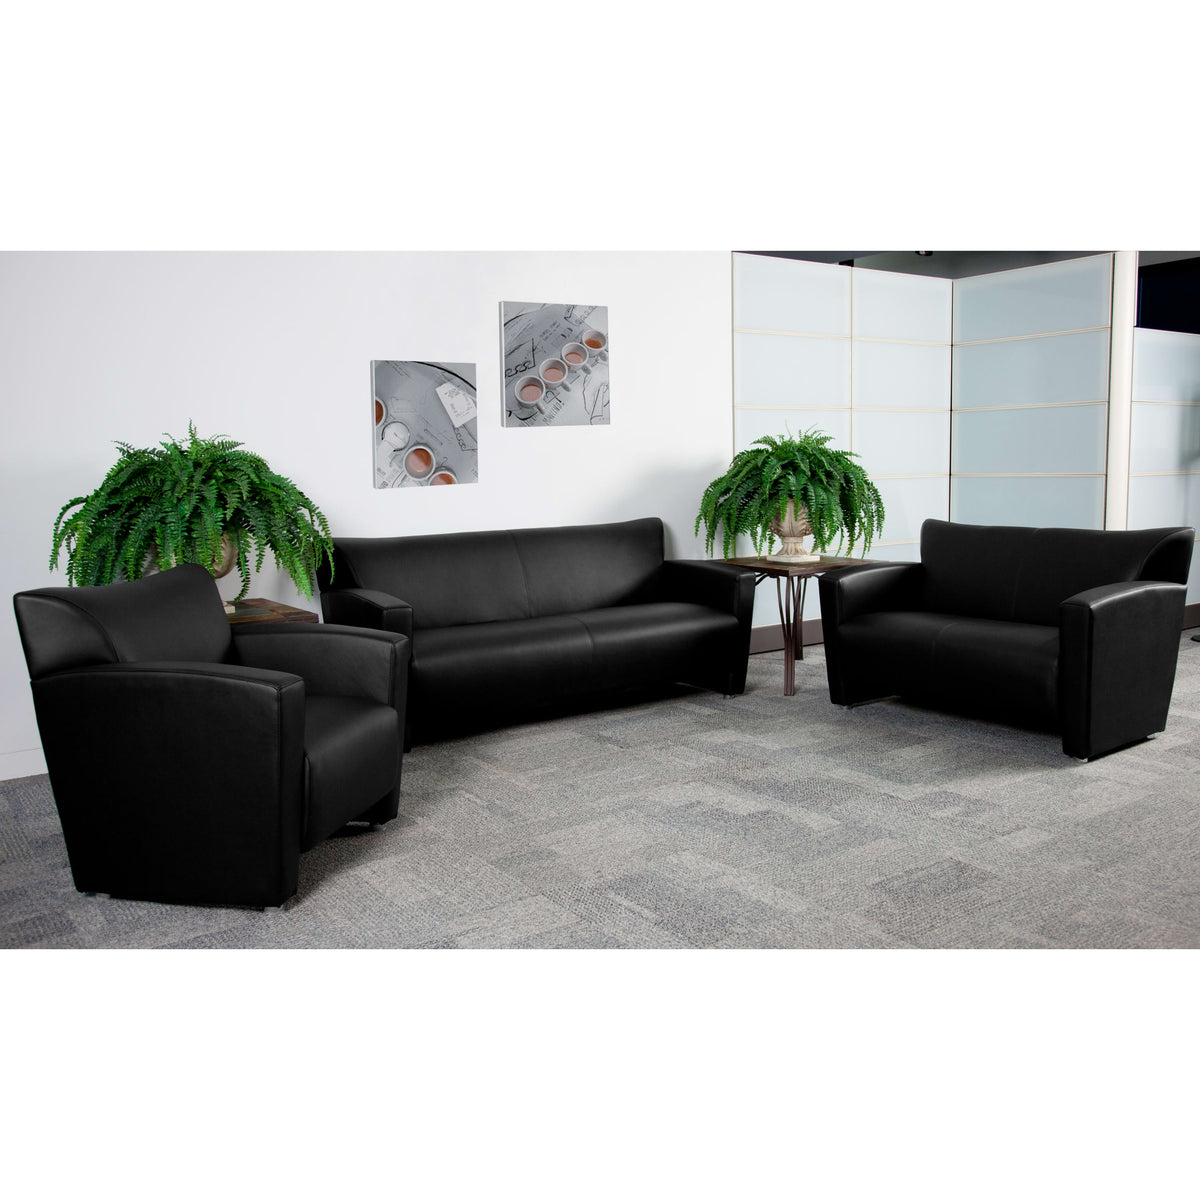 Black |#| Black LeatherSoft Loveseat w/ Extended Panel Arms - Reception & Lounge Seating